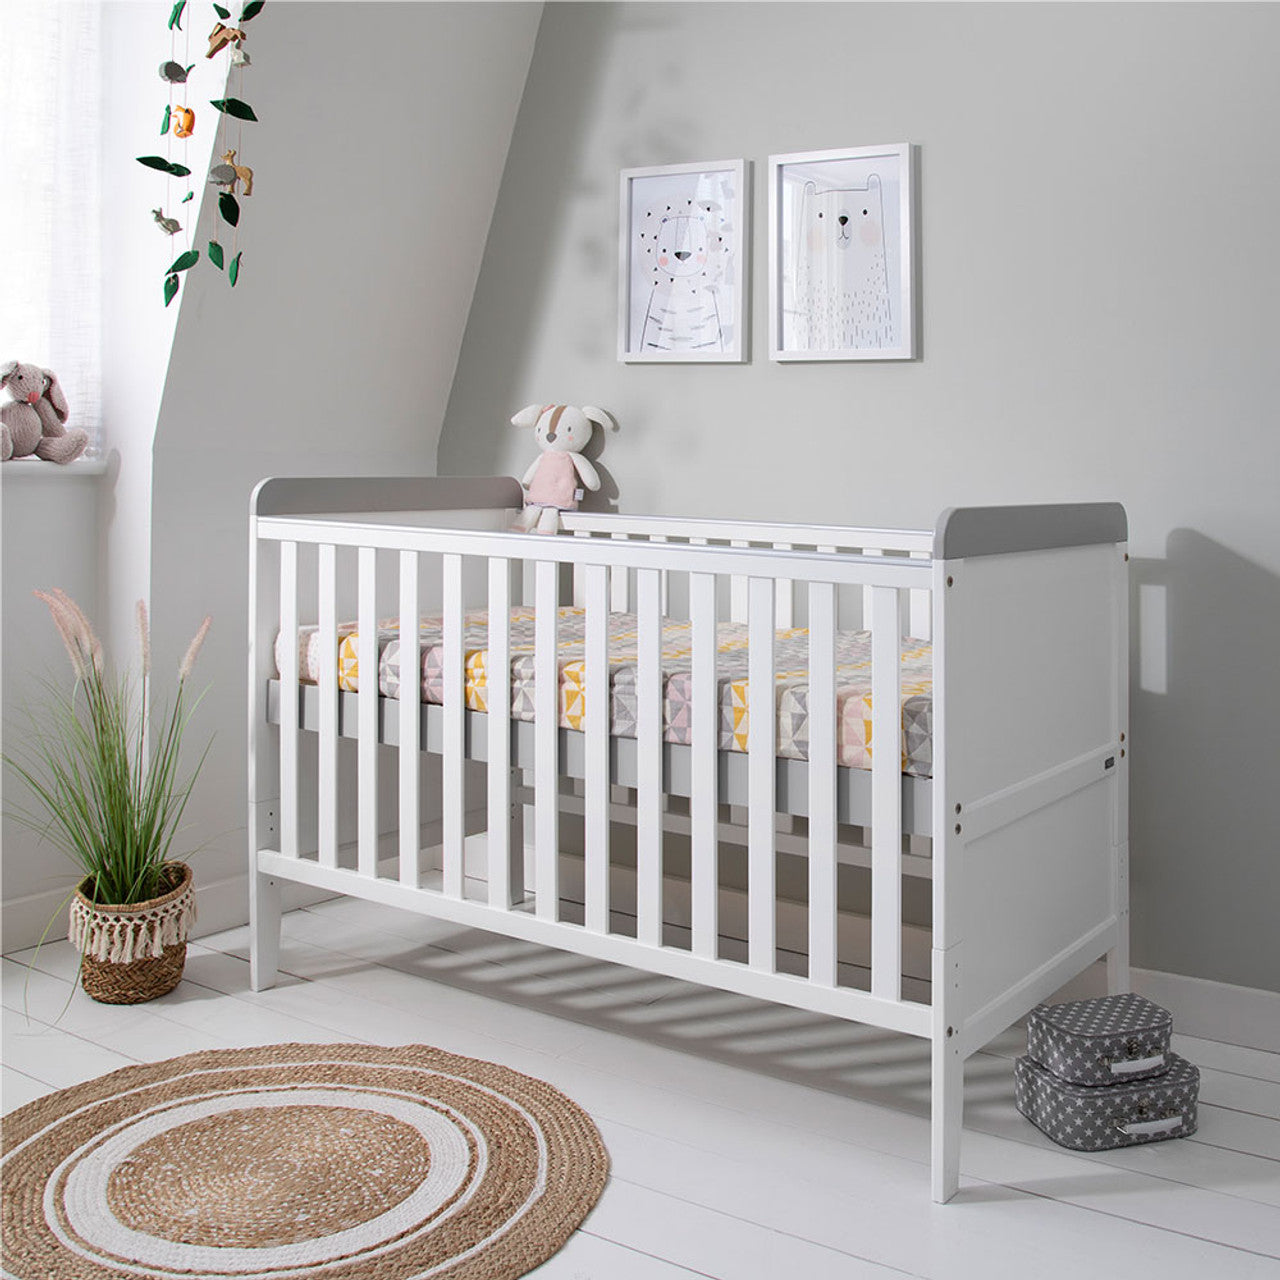 Tutti Bambini Rio Cot Bed with Cot Top Changer & Mattress - White/Dove Grey -  | For Your Little One